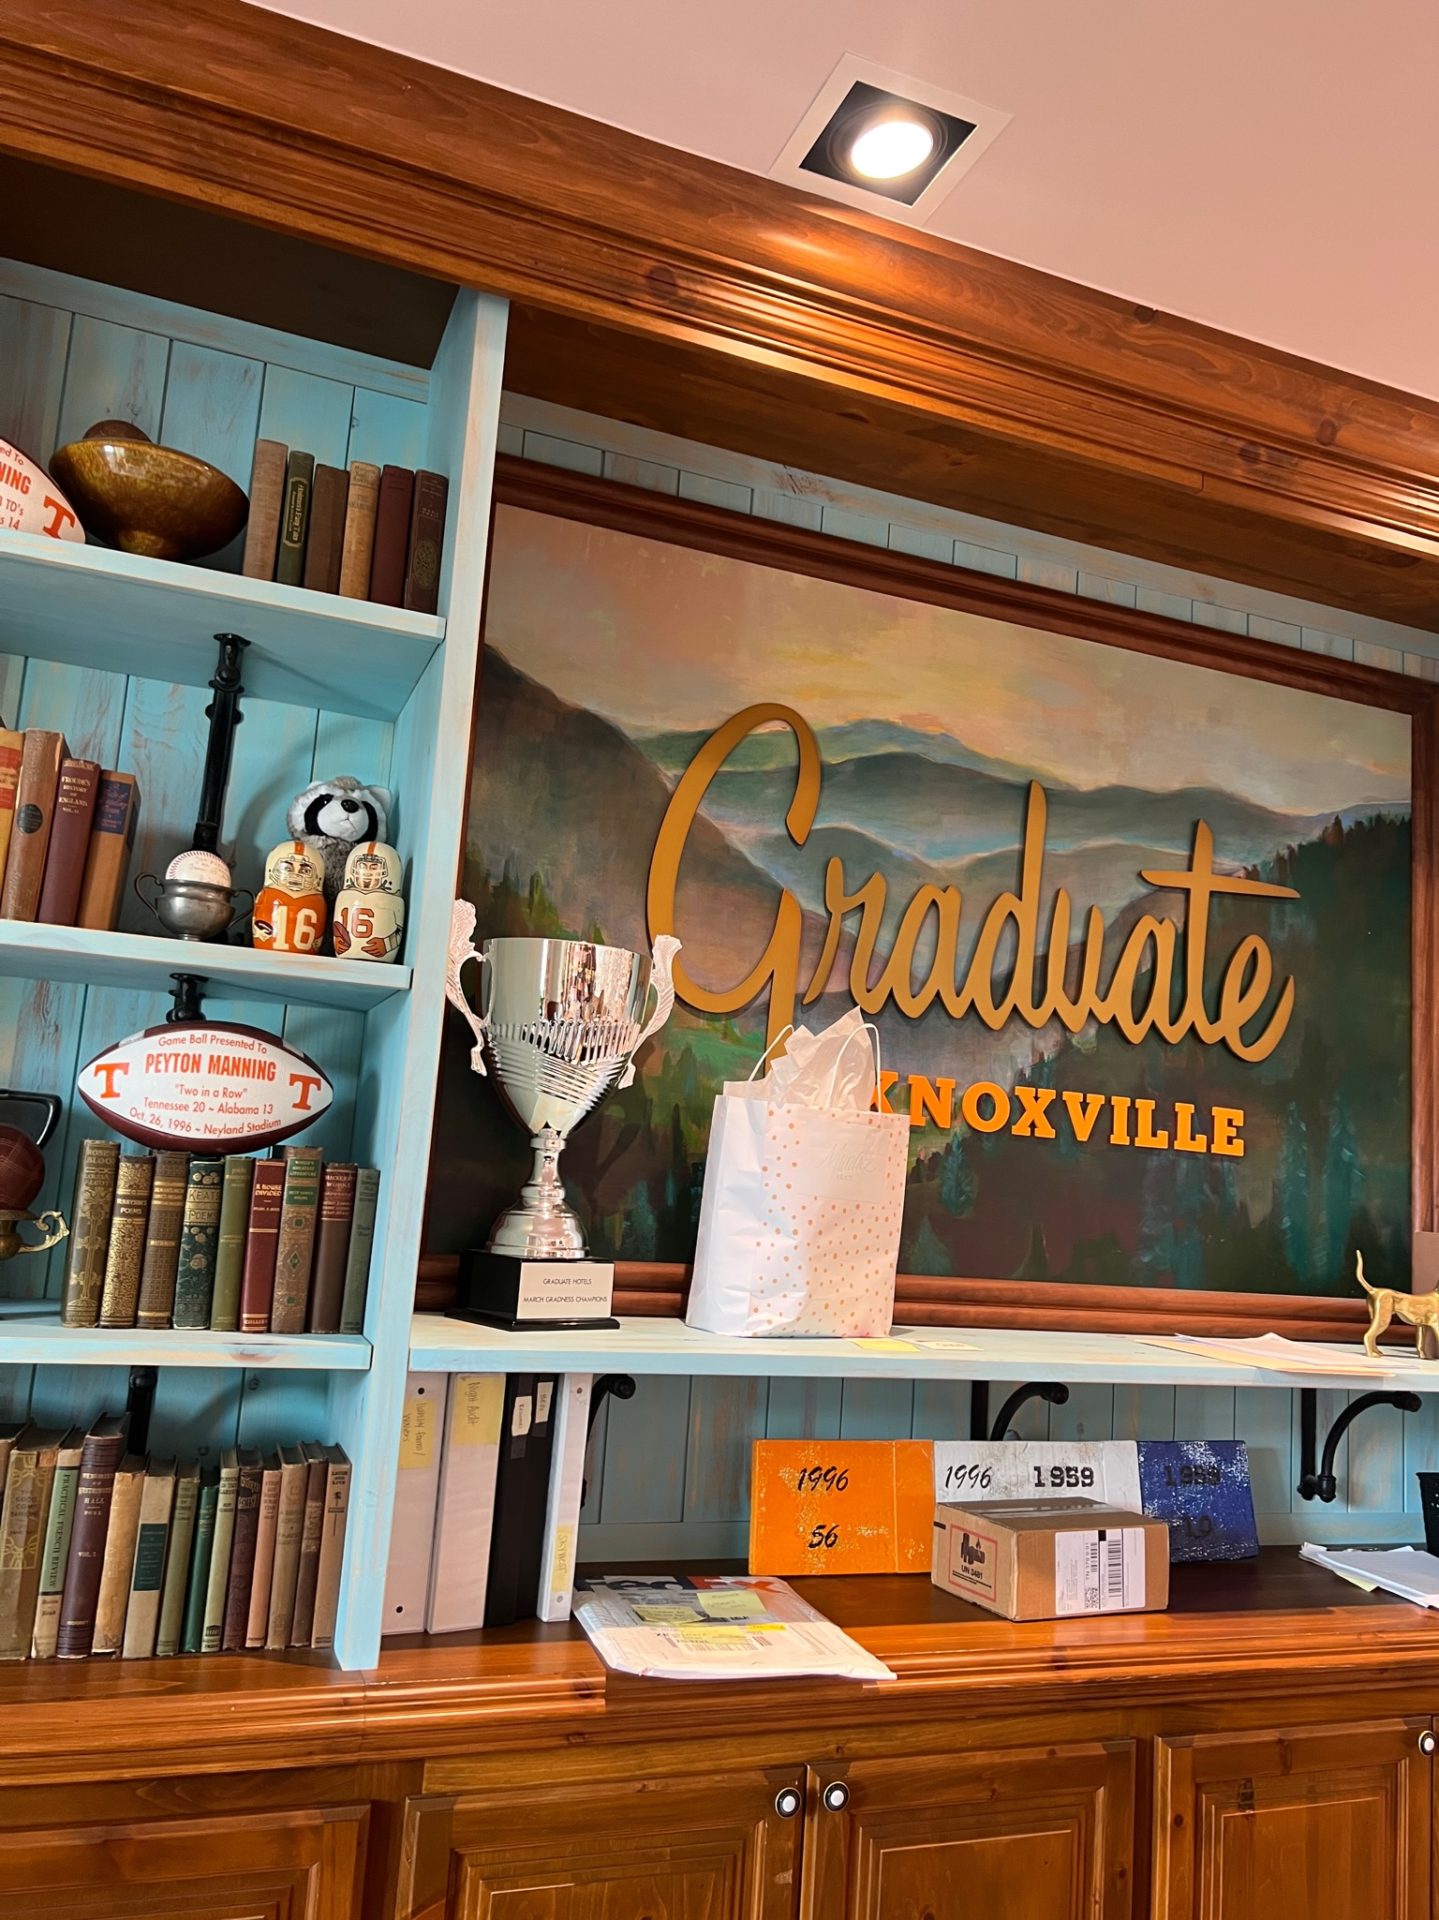 Graduate Hotel Knoxville, where to stay in Knoxville, travel, family, hotel
